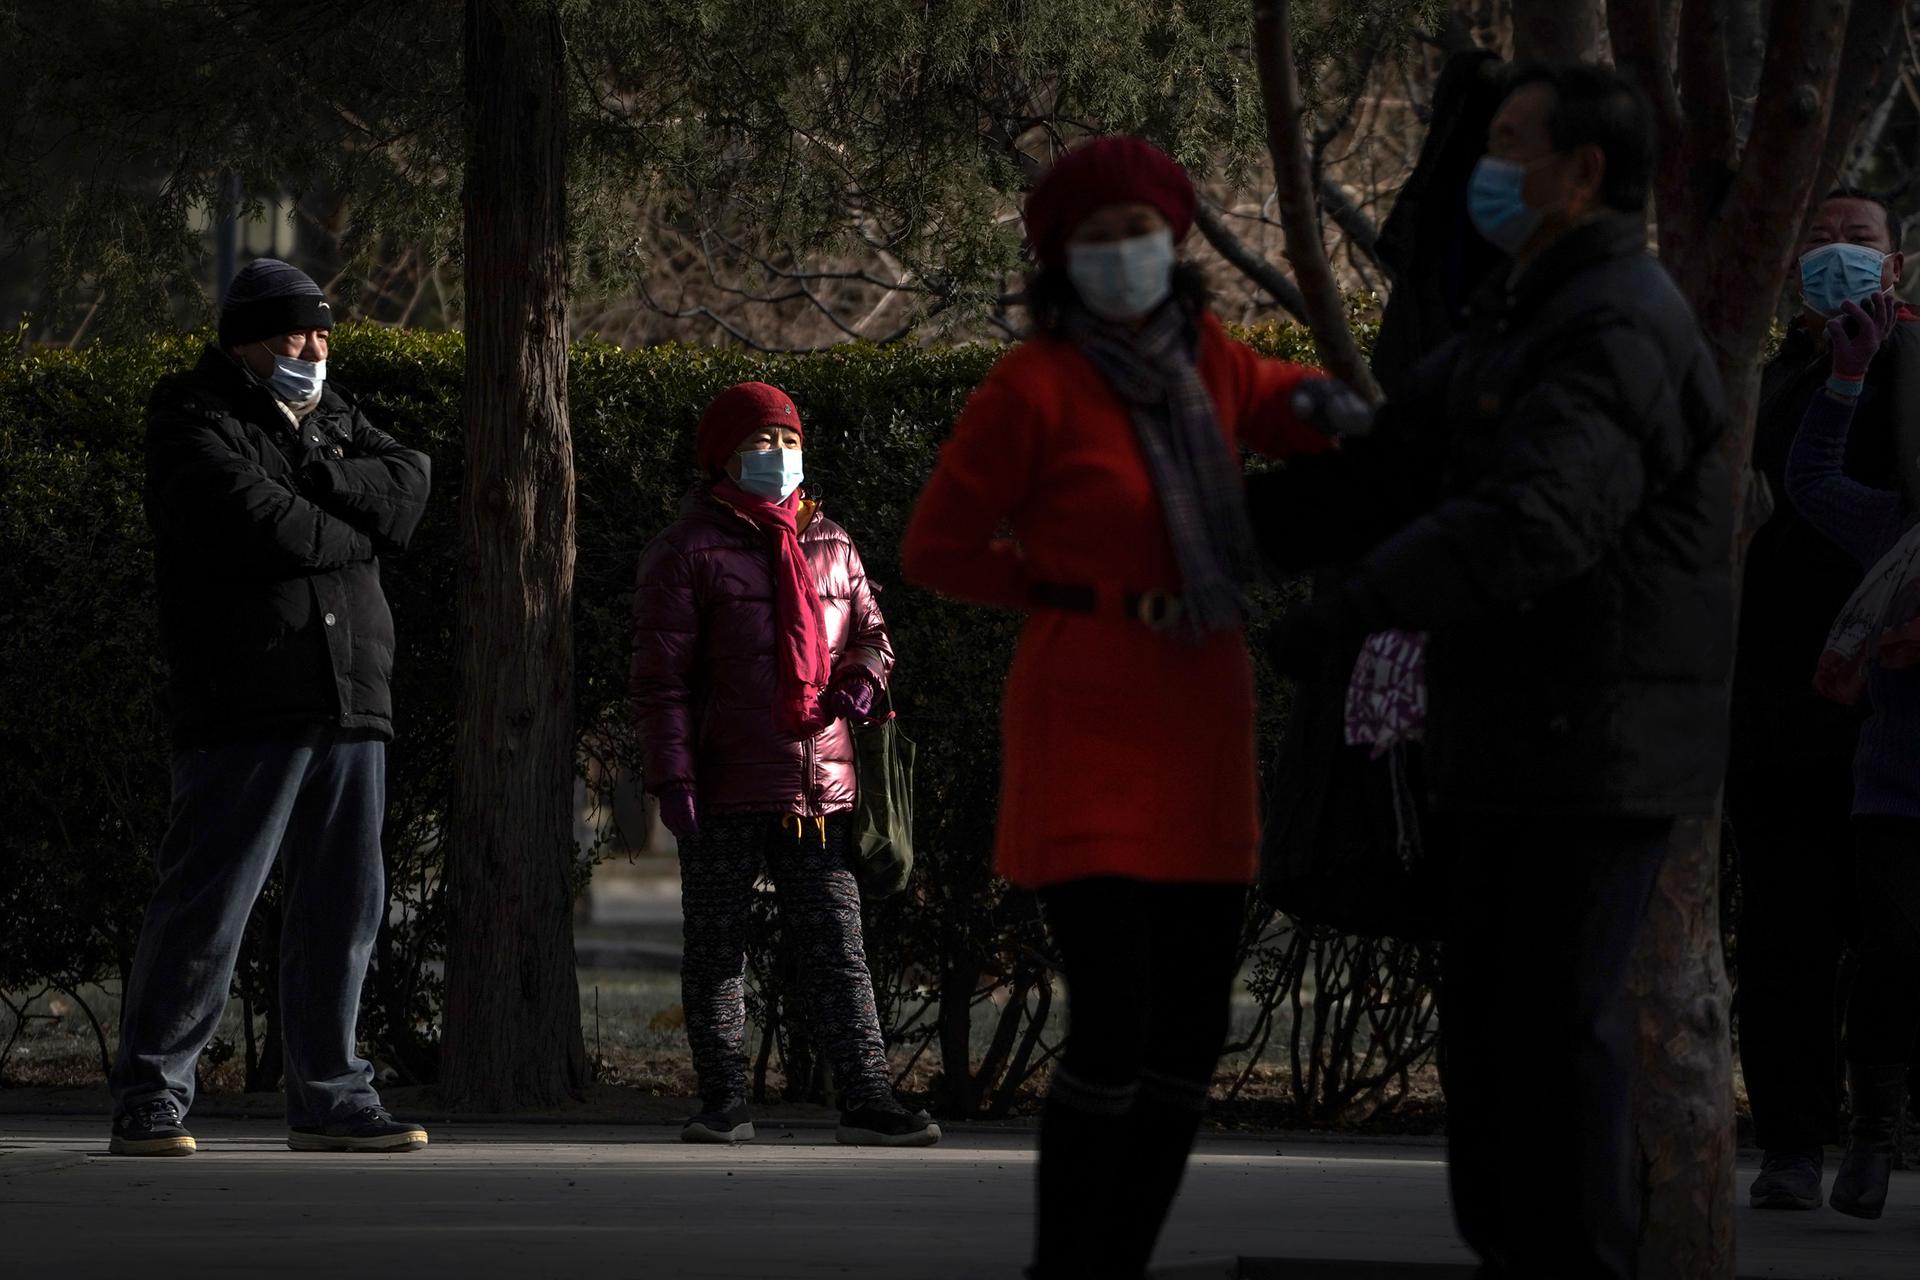 Several people are shown standing in a park and wearing face masks and winter jackes=ts.